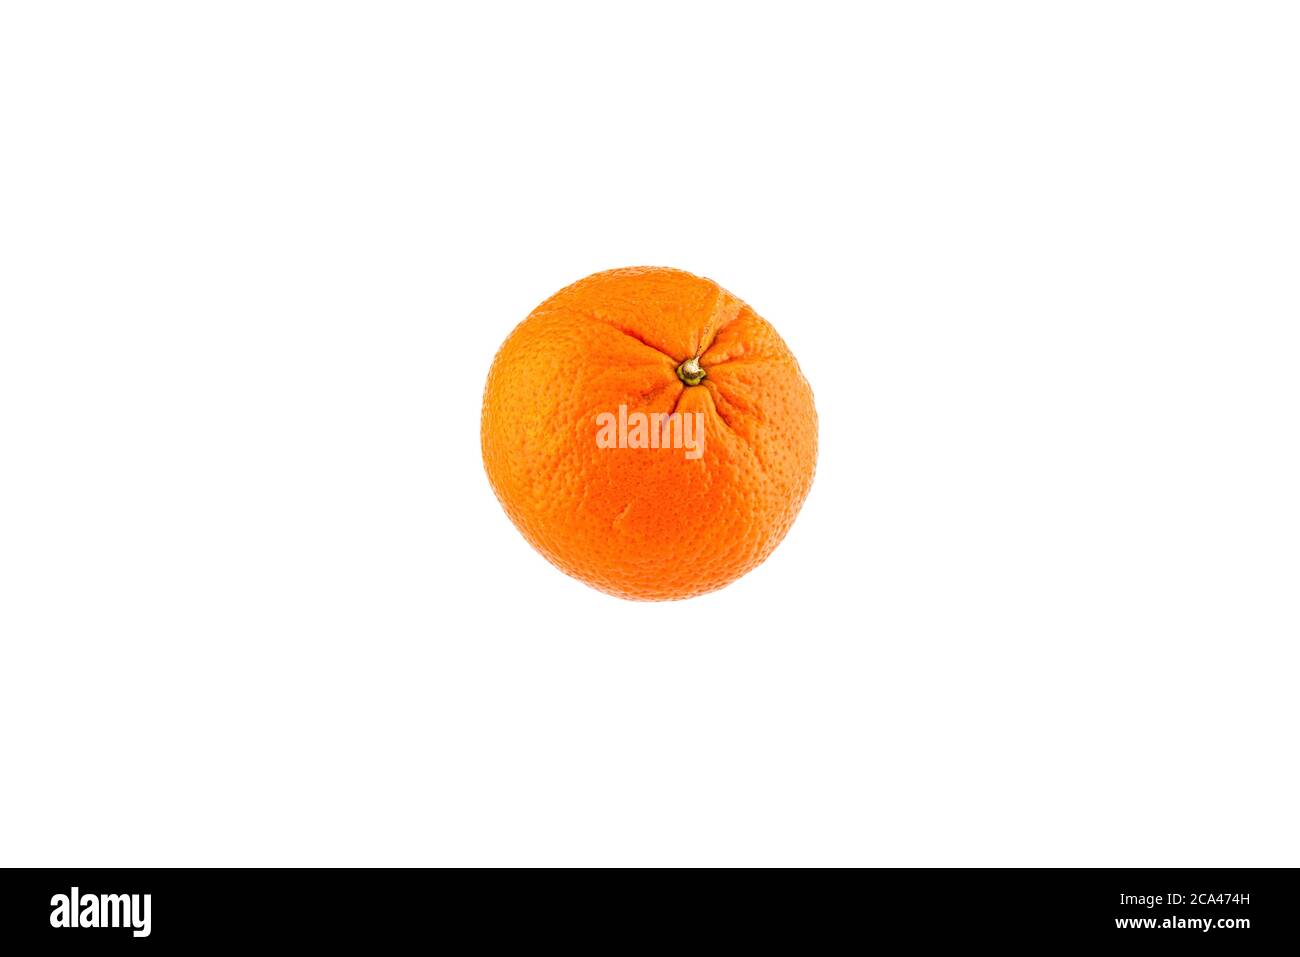 Ripe orange isolated on white background. The orange is the fruit of various citrus species in the family Rutaceae. Stock Photo